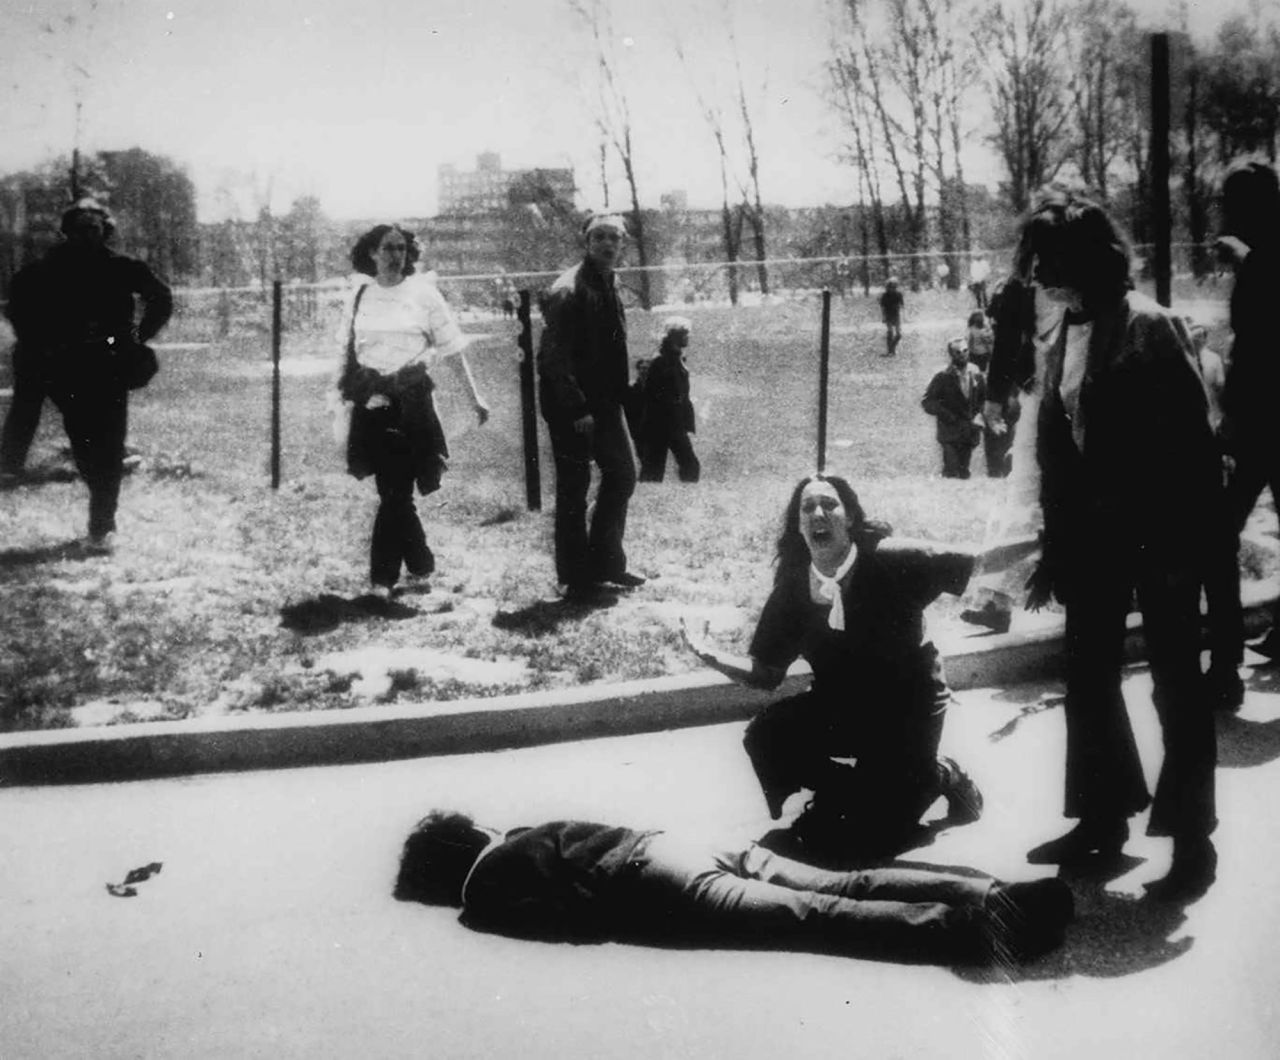 In this Pulitzer Prize-winning photo, taken by Kent State photojournalism student John Filo, Mary Ann Vecchio can be seen screaming as she kneels by the body of a slain student.